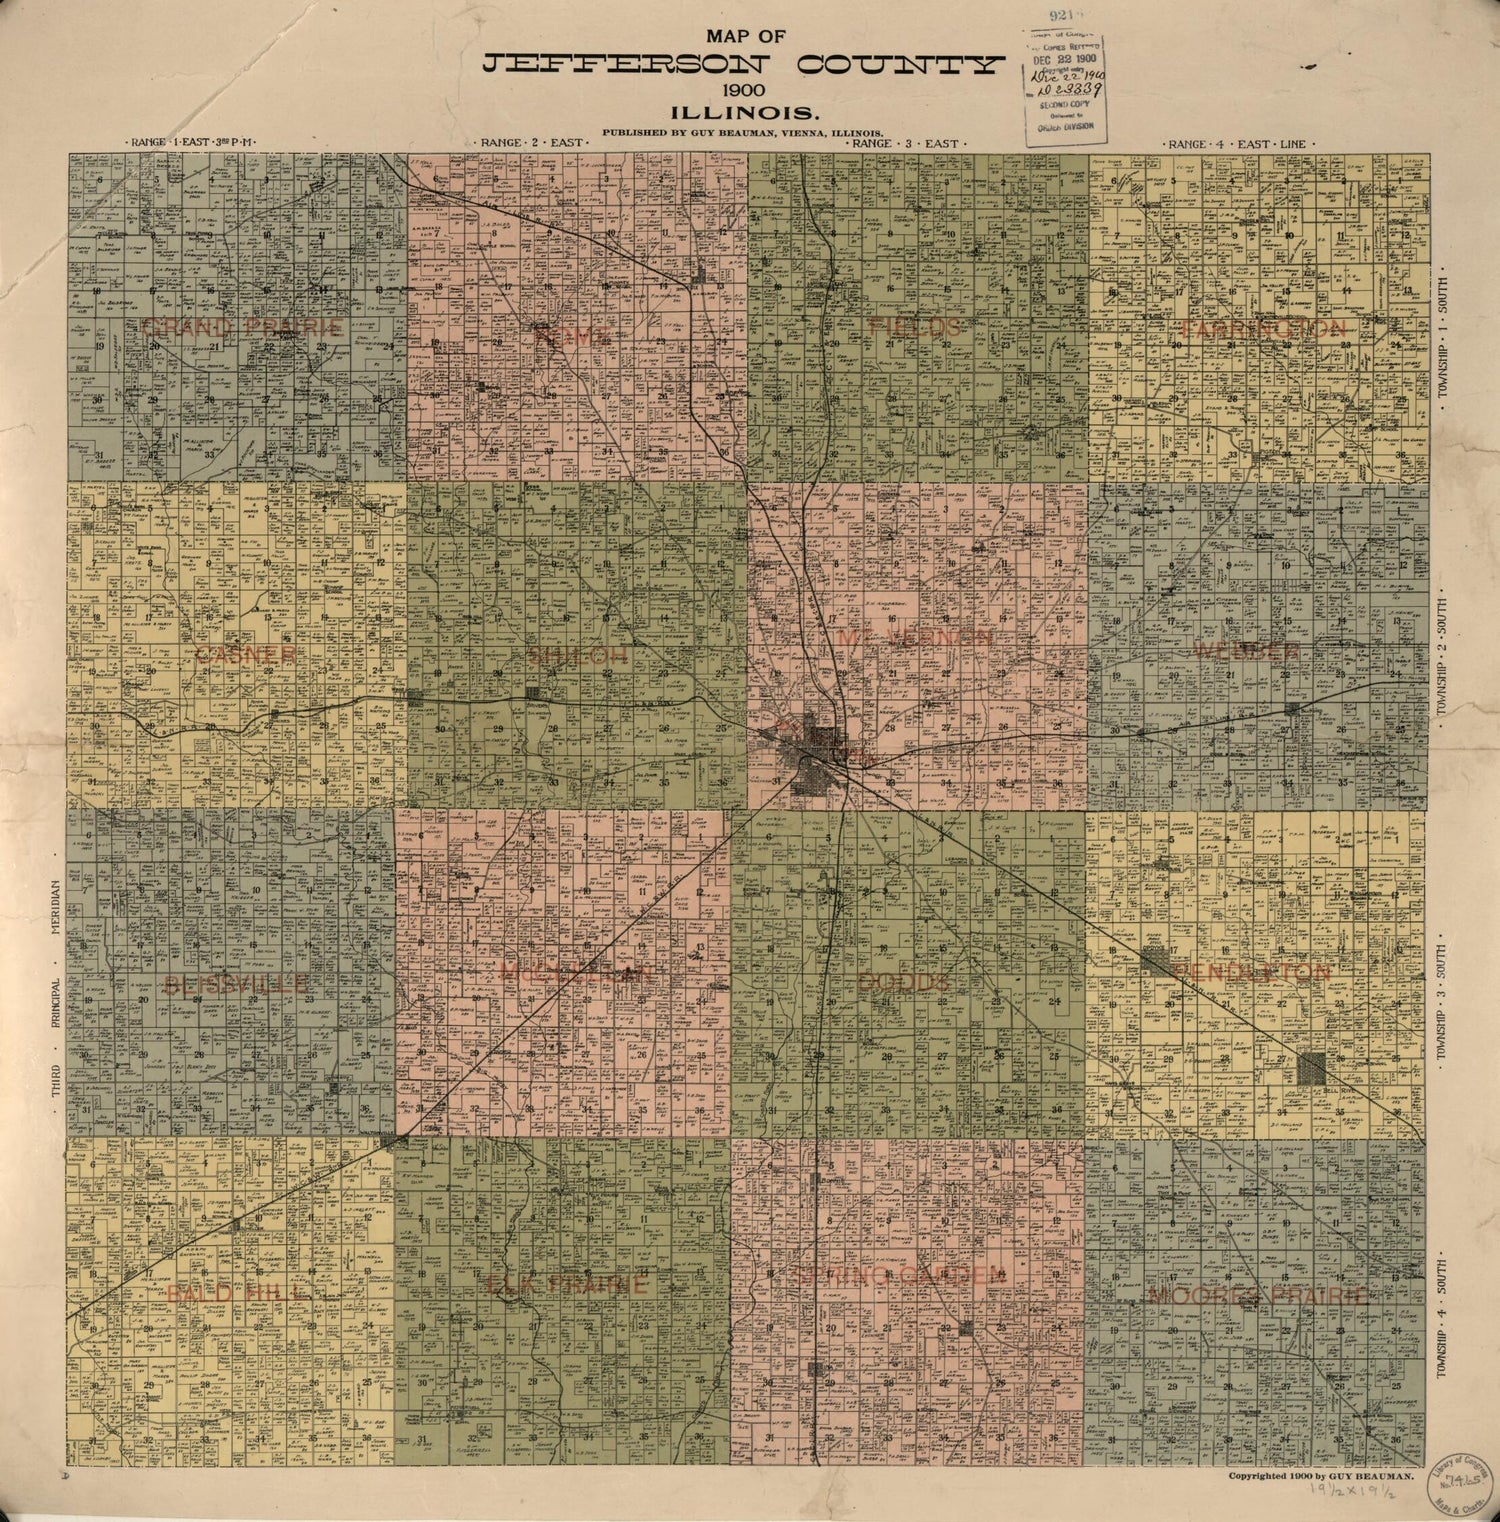 This old map of Map of Jefferson County, Illinois from 1900 was created by Guy Beauman in 1900